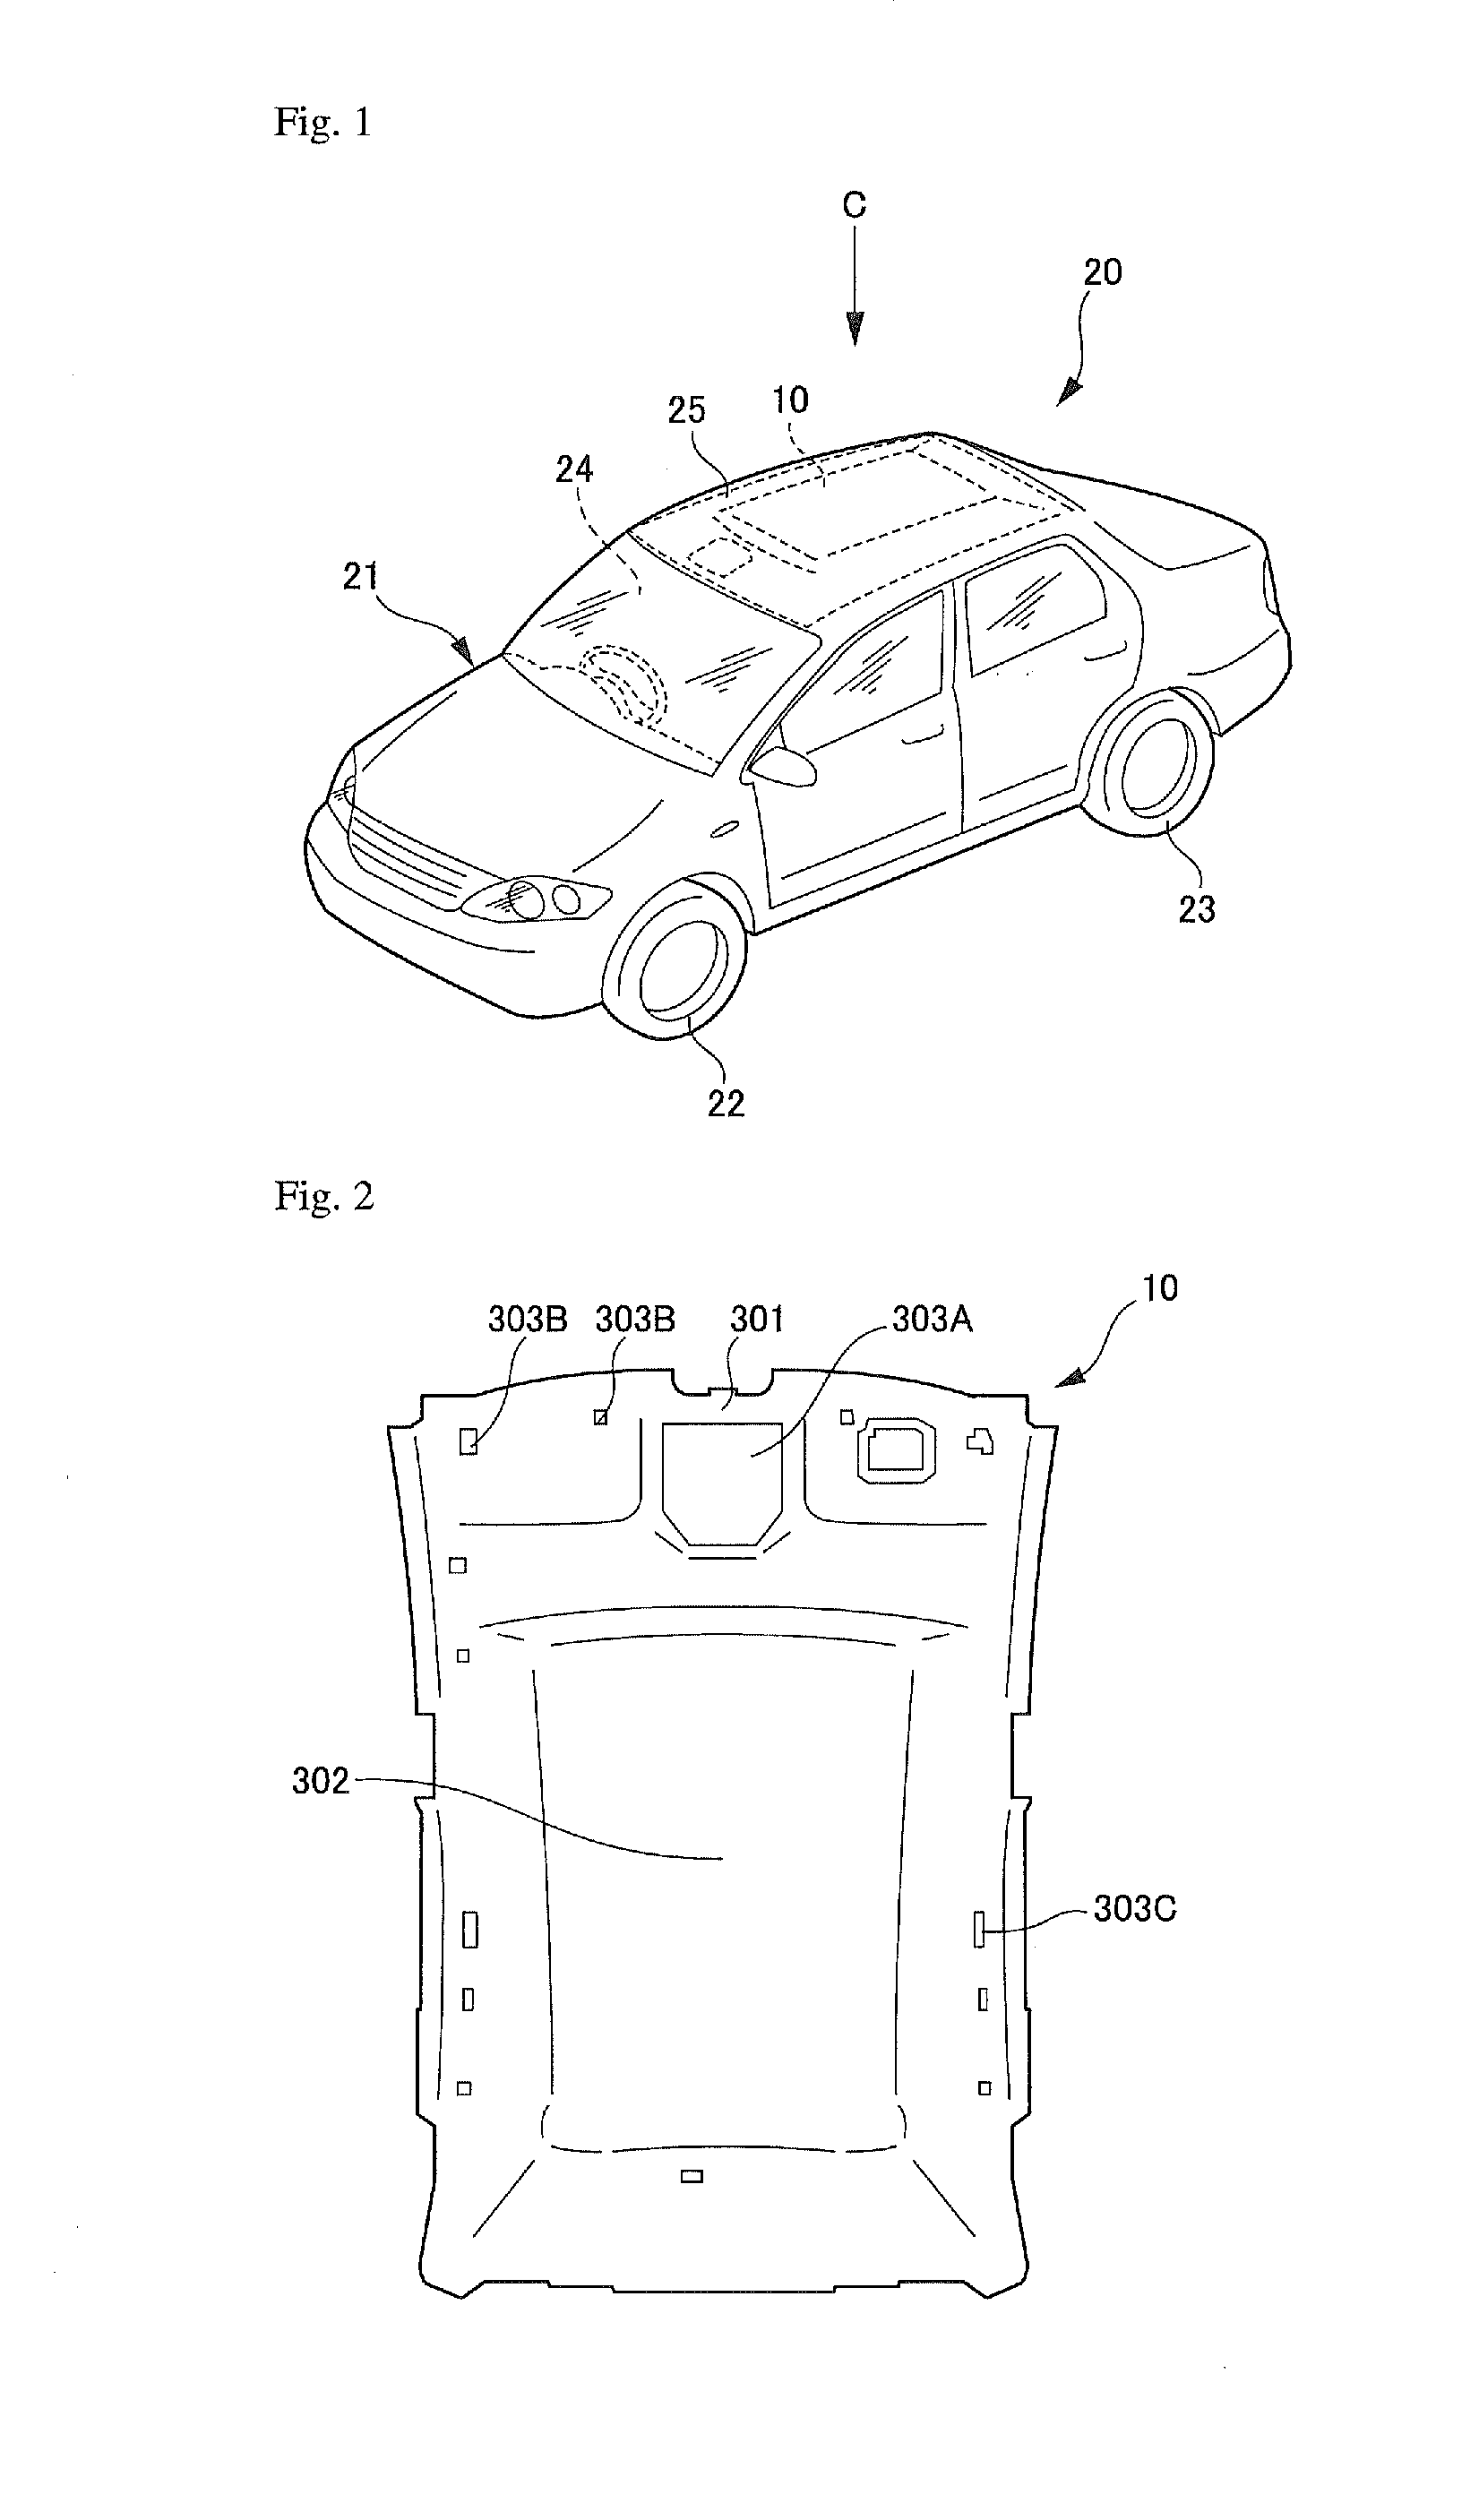 Interior material for vehicle